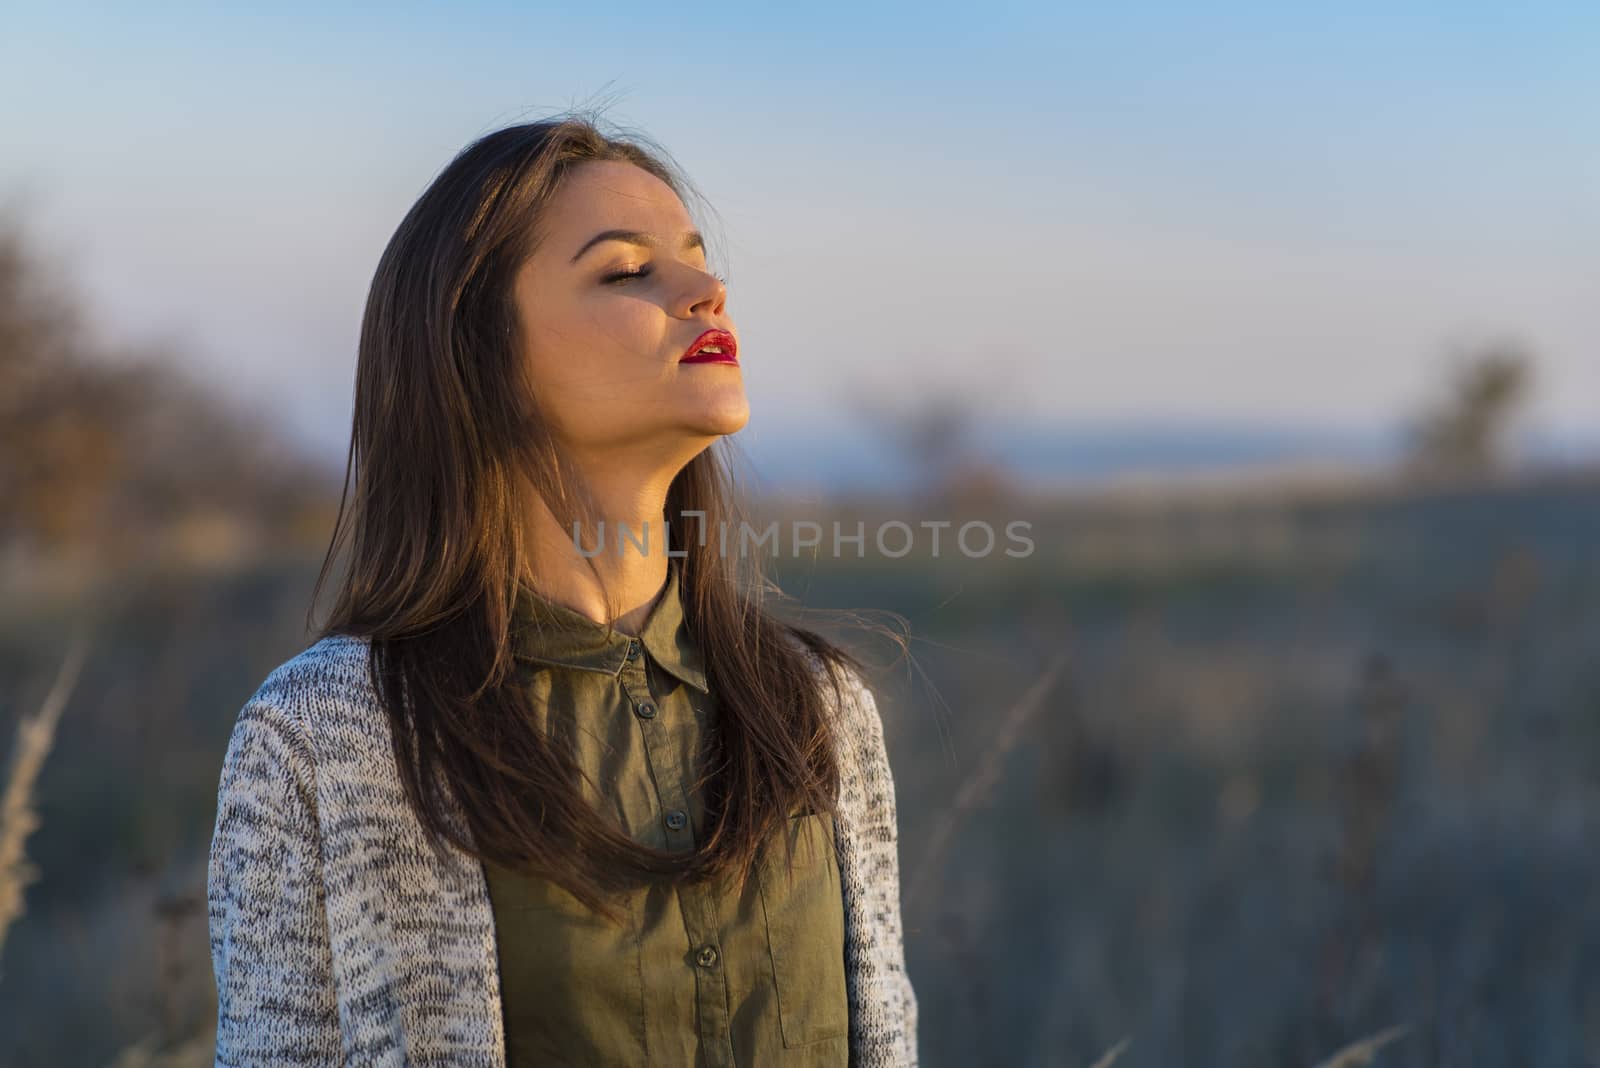 Enjoying sun before winter. A beautiful teenage girl standing in a field at autumn sunset, enjoying last sun days before winter. Girl has brown hair and red lips.